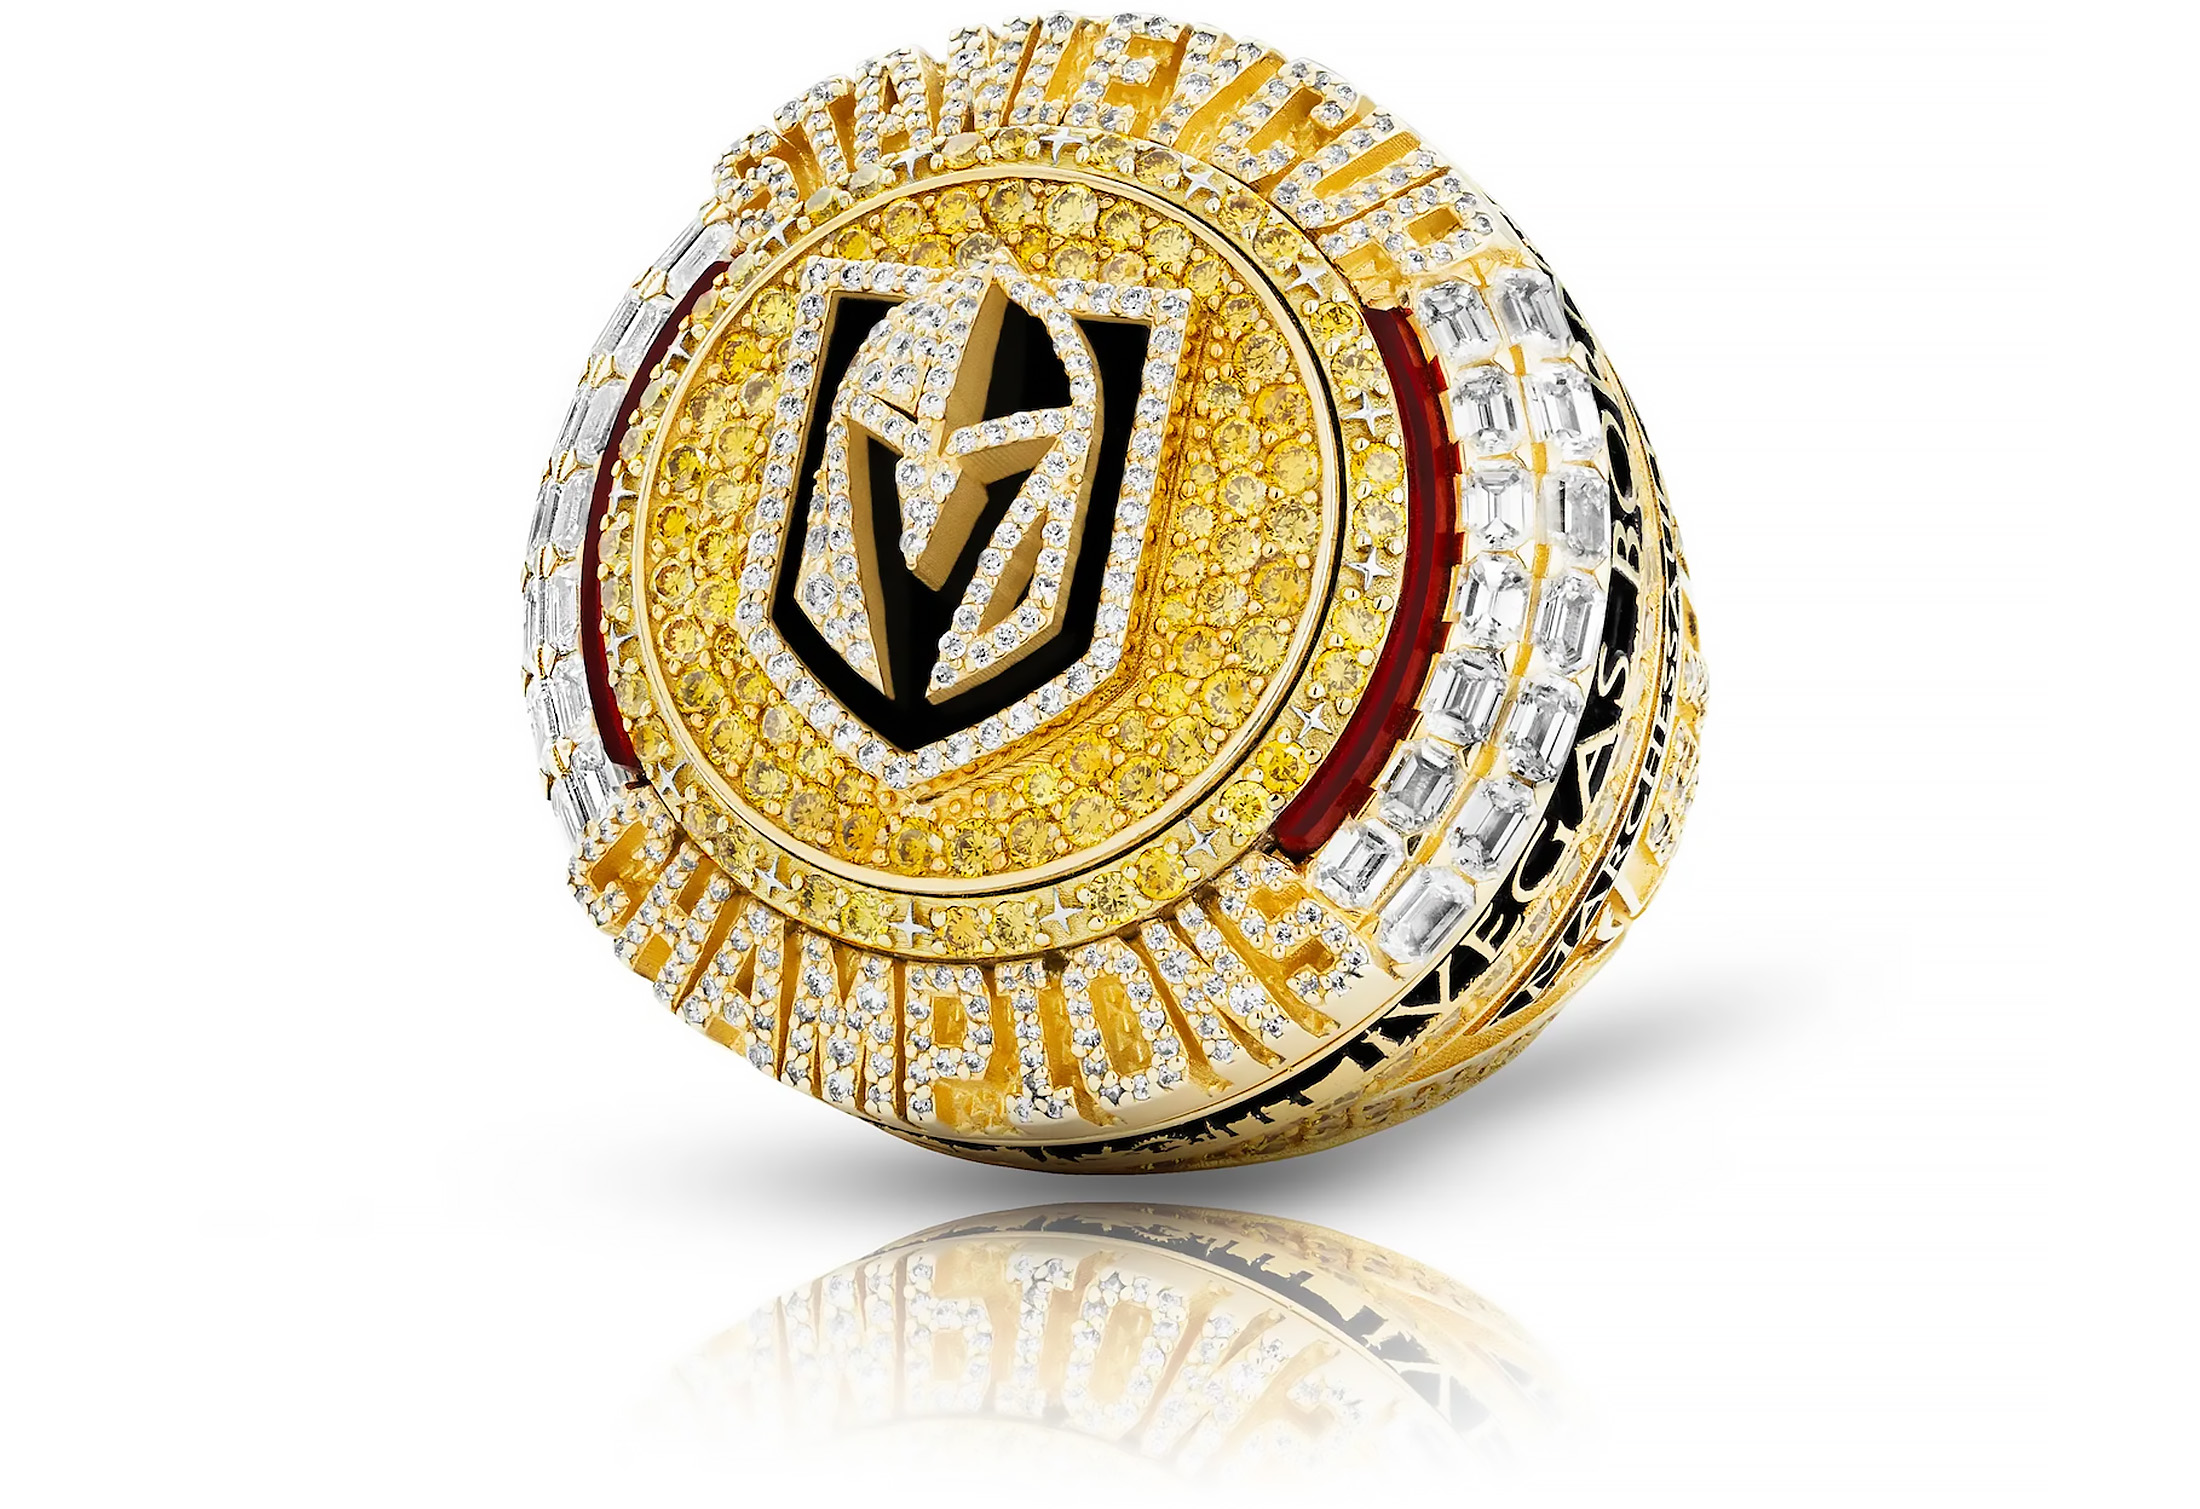 See The Las Vegas Golden Knights Epic Championship Ring